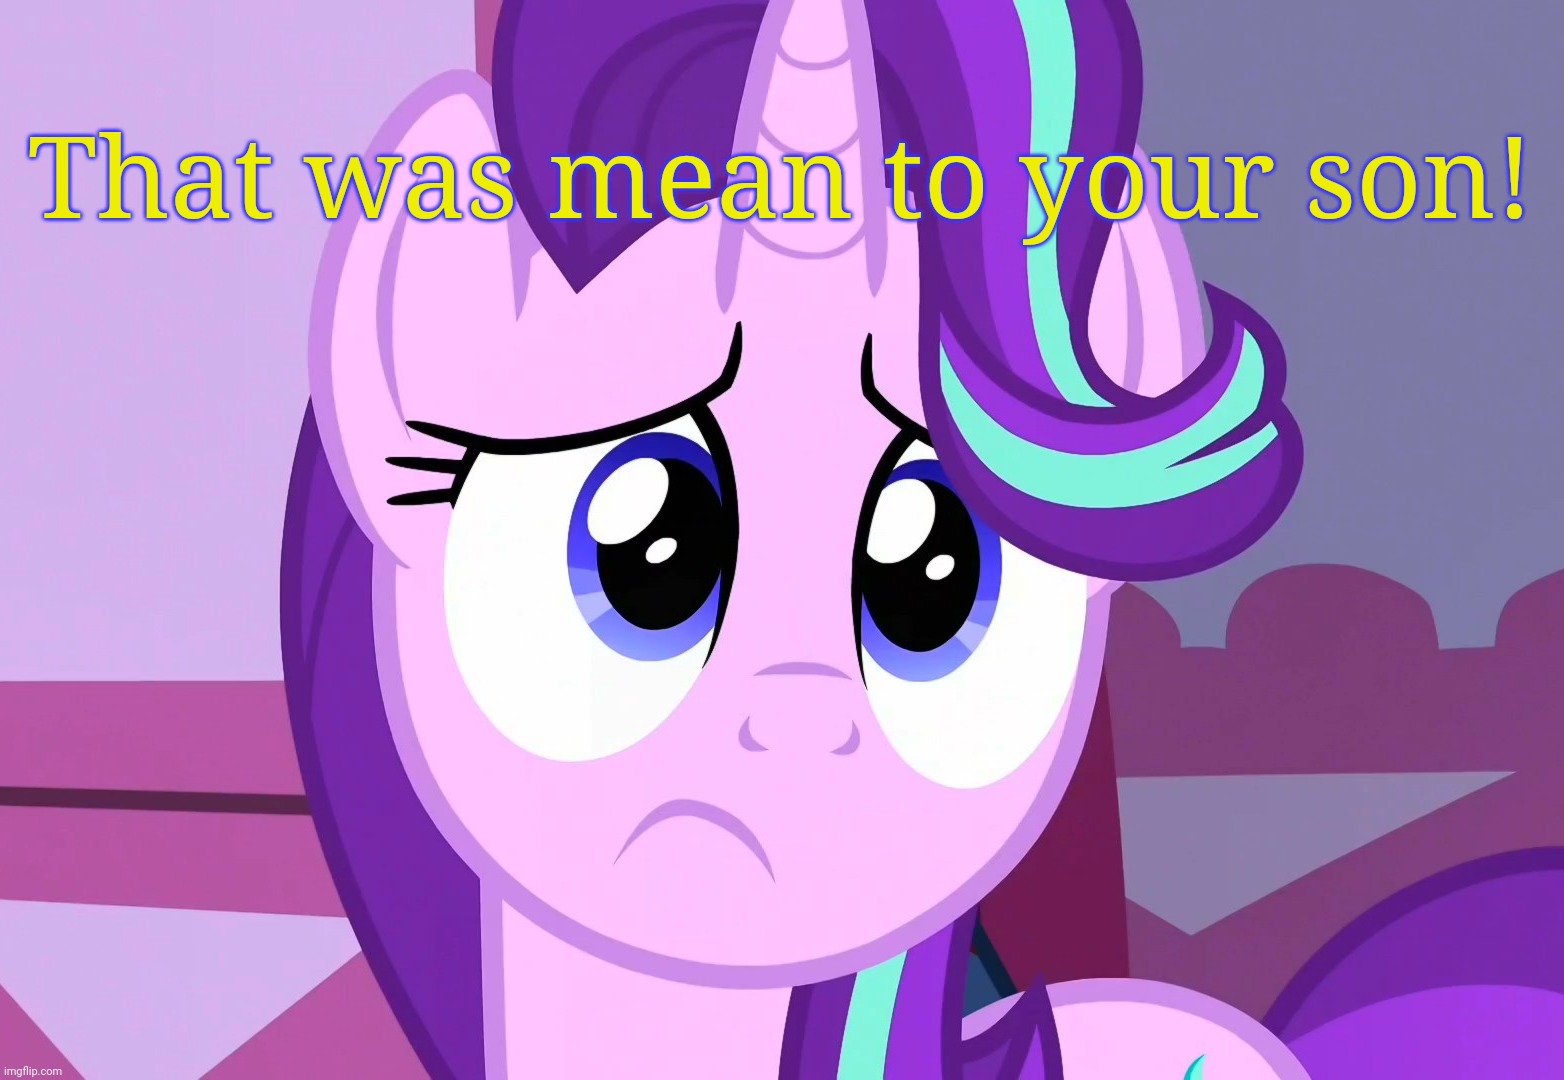 Sadlight Glimmer (MLP) | That was mean to your son! | image tagged in sadlight glimmer mlp | made w/ Imgflip meme maker